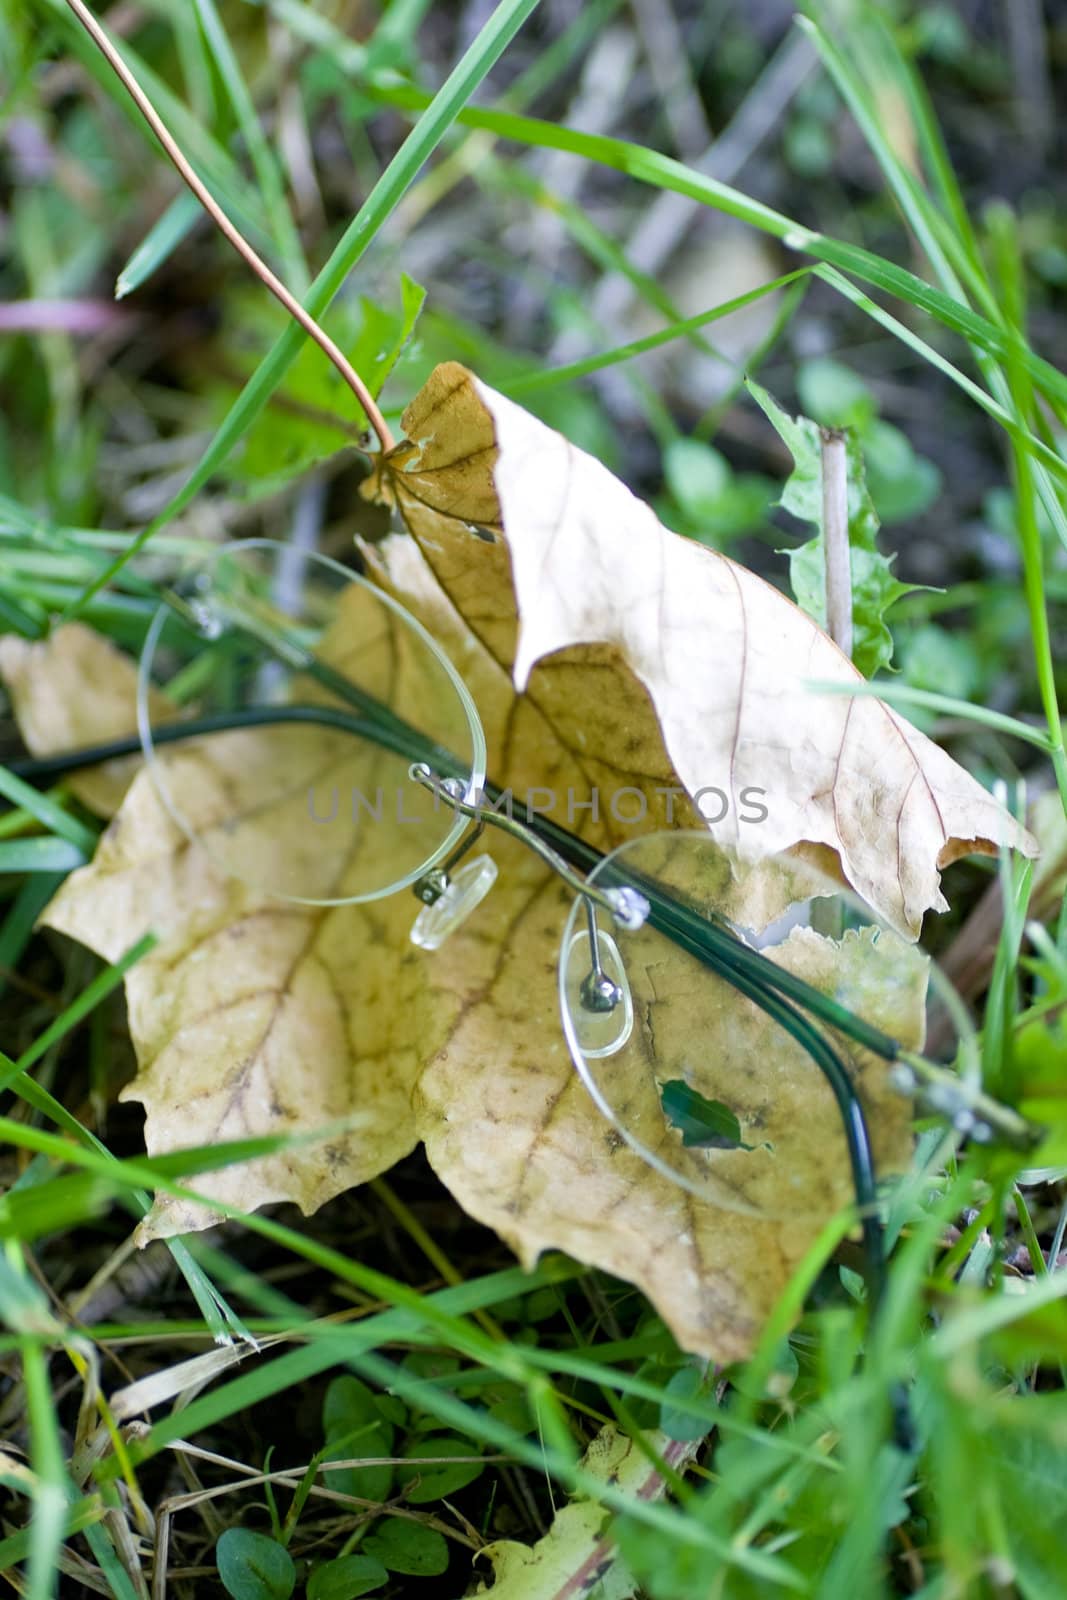 A set of eye glasses that have been dropped on the lawn, and have landed on a shrivelled maple leaf.